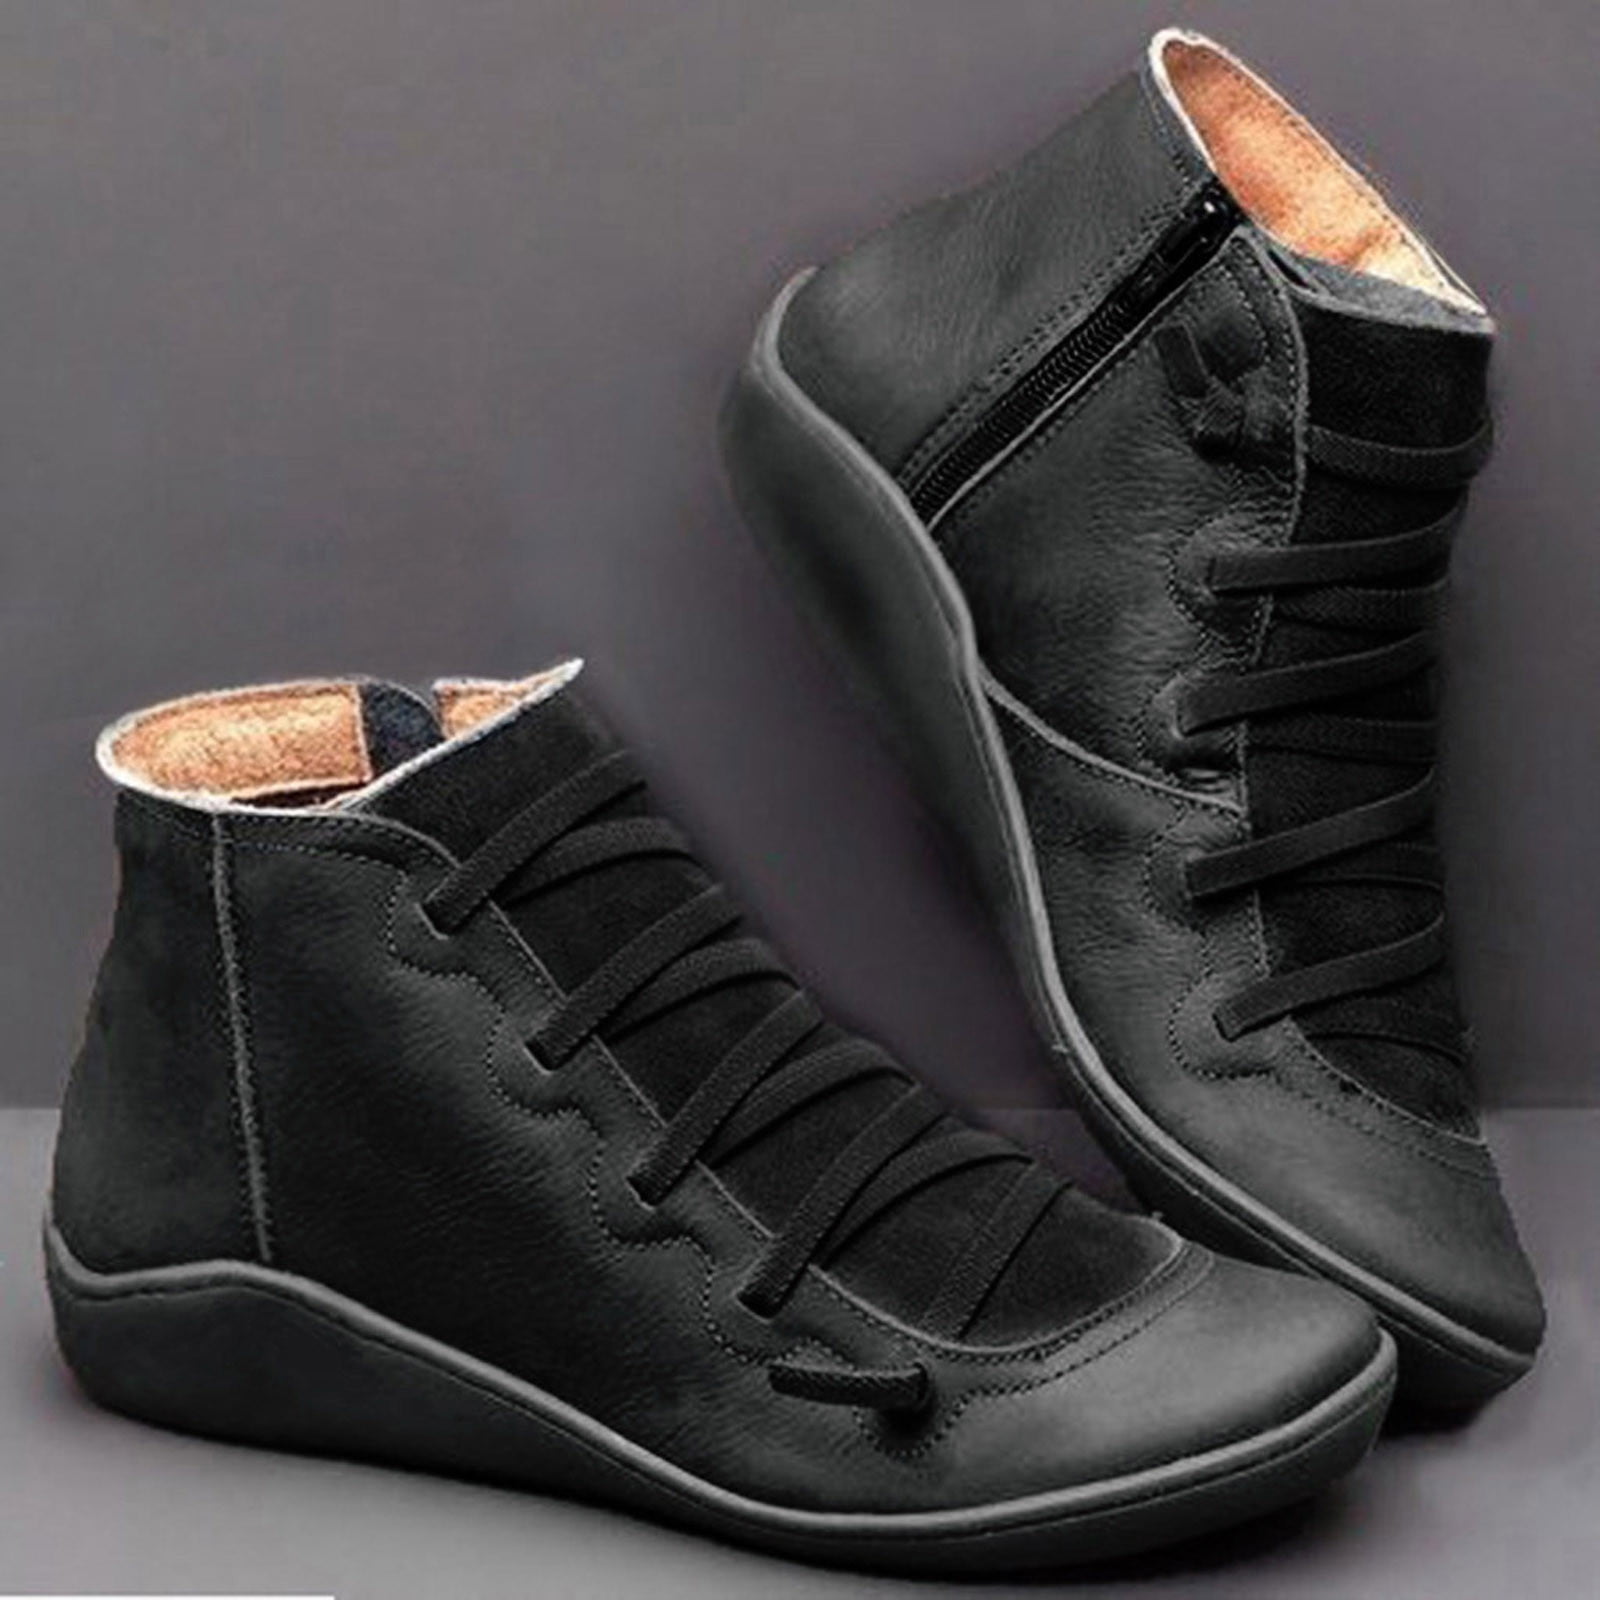 UTTOASFAY Clearance Shoes Women Boots,Women Casual Flat Leather Retro Lace-Up Boots Side Zipper Shoe Boots Rollbacks - Walmart.com